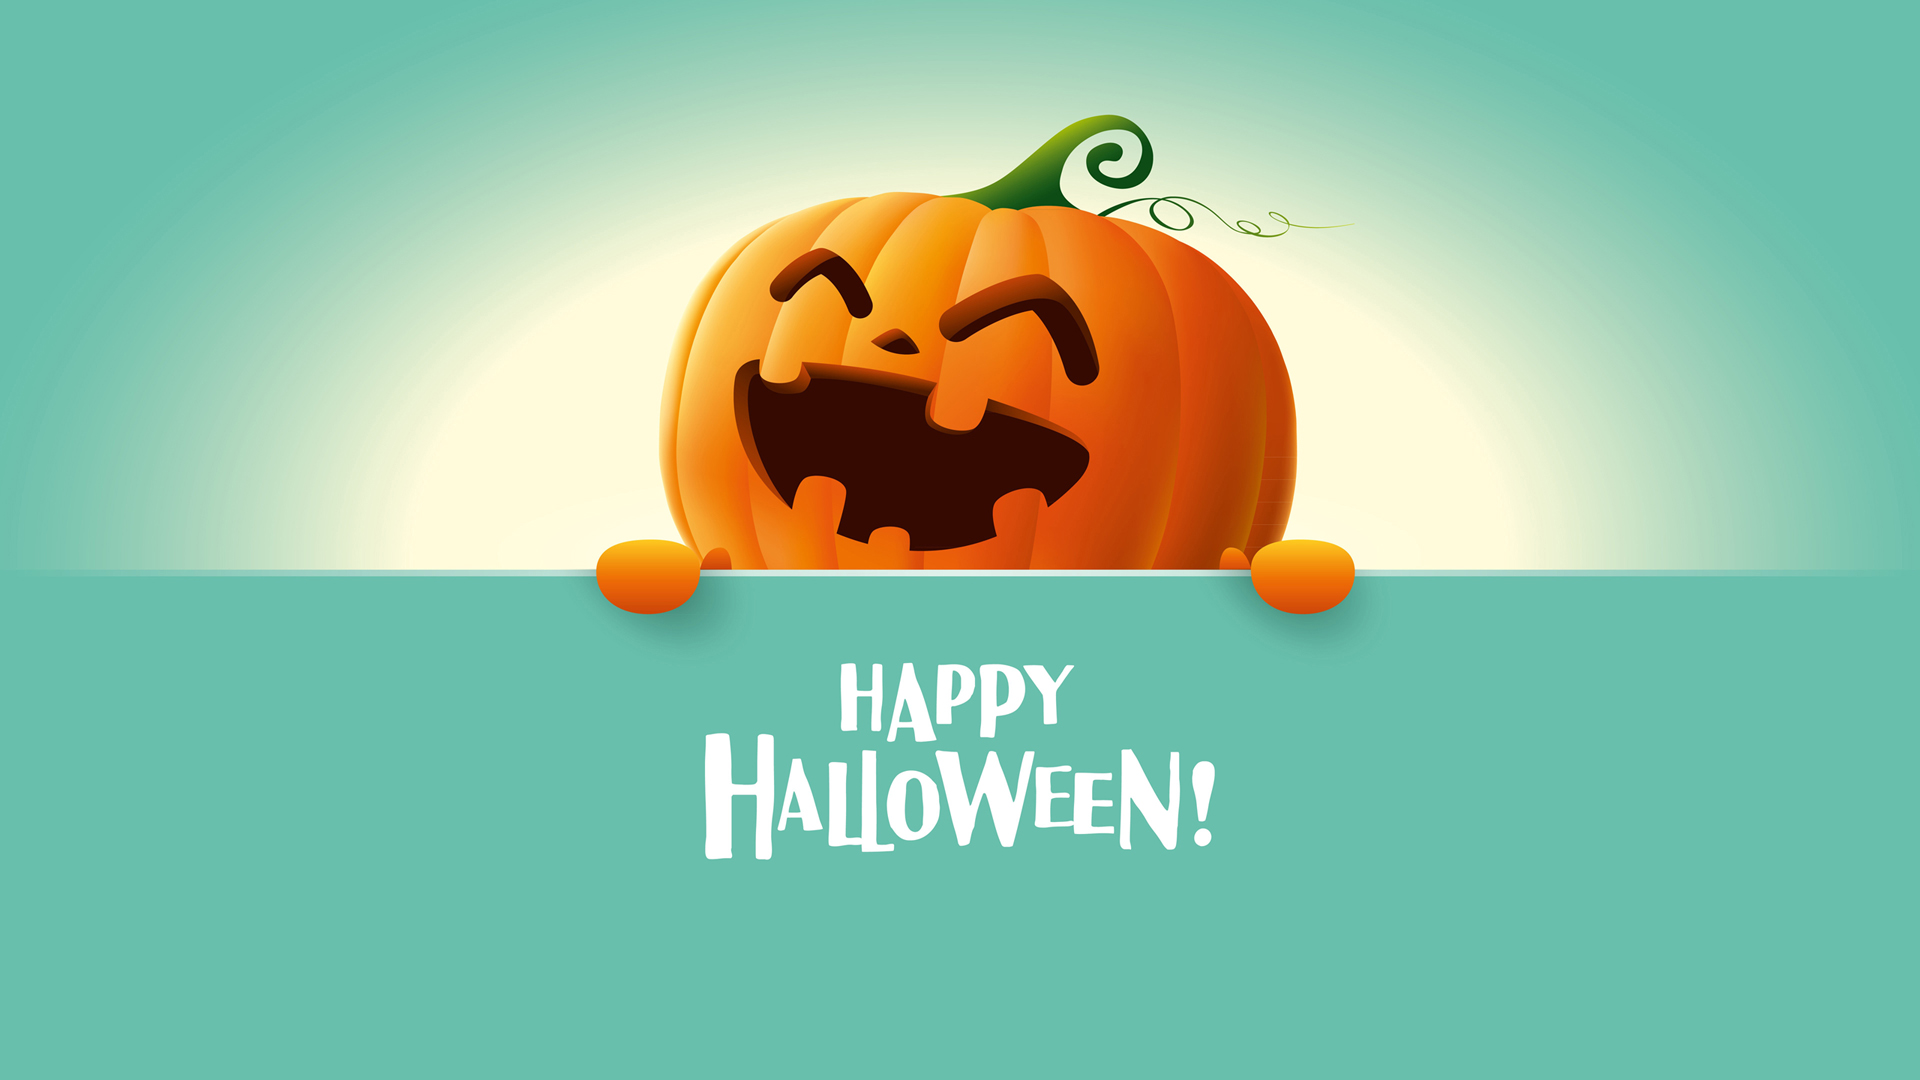 General 1920x1080 Halloween pumpkin smiling happy simple background typography turquoise